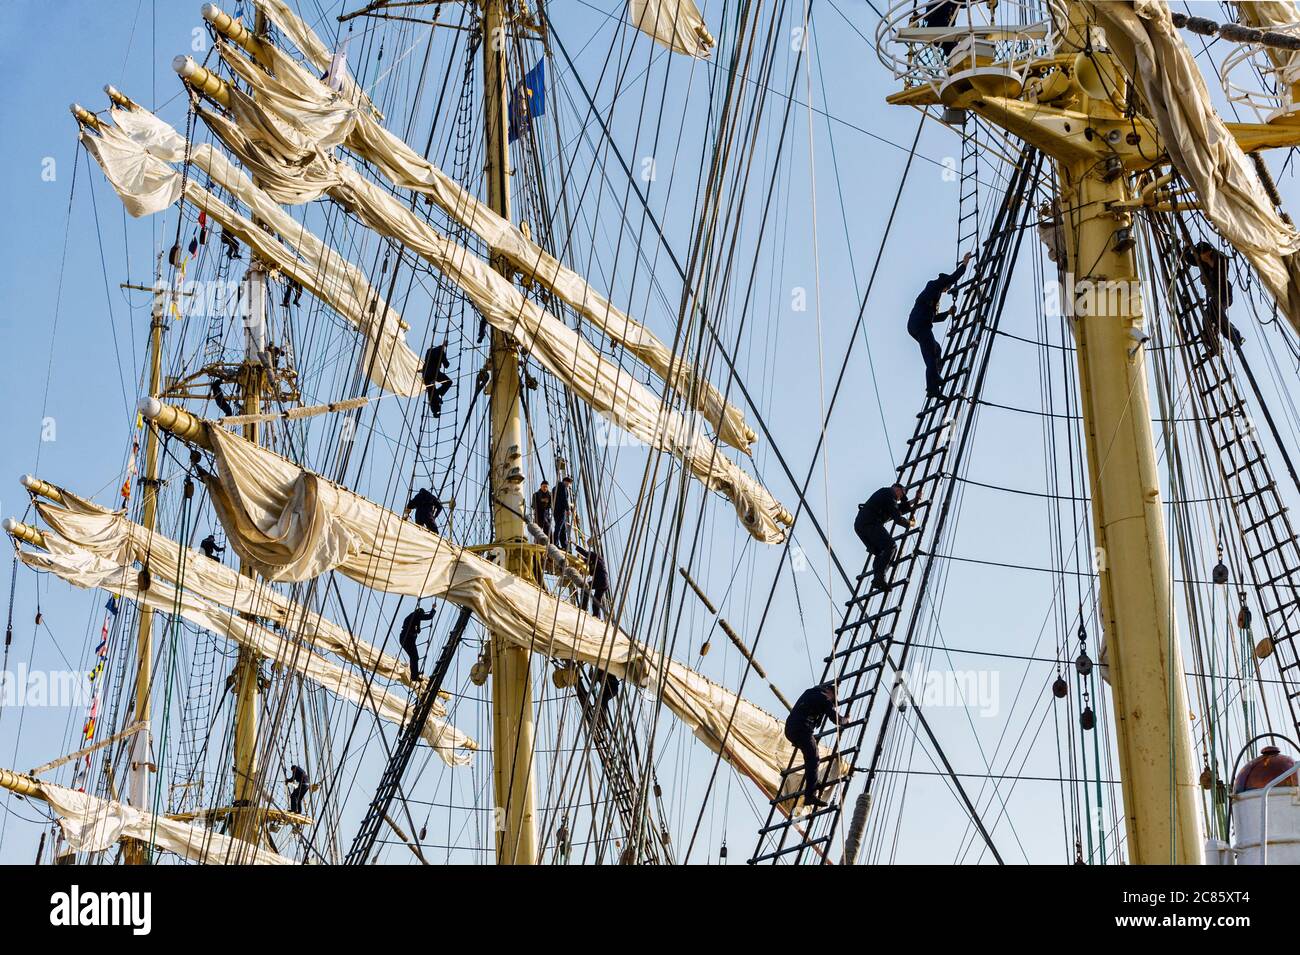 Mats and sails of the four masted Russian sailing ship Kruzenshtern in Dunkirk, France Stock Photo